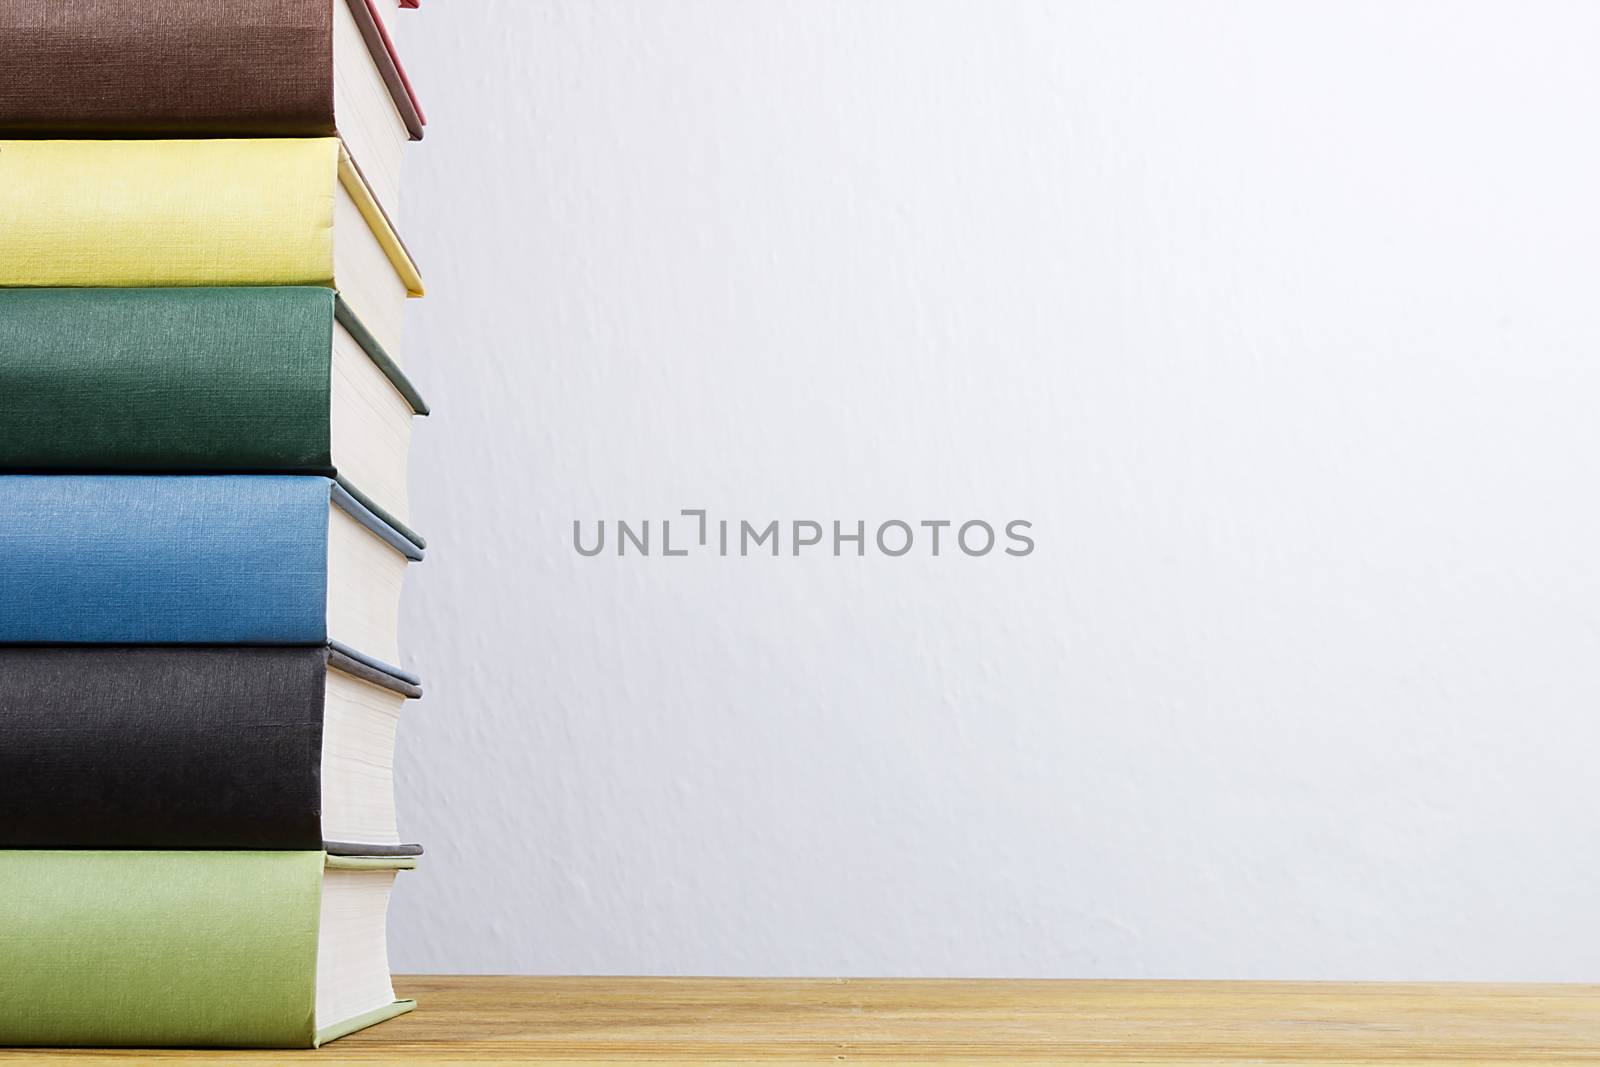 Stack of books with colorful covers on a wooden table